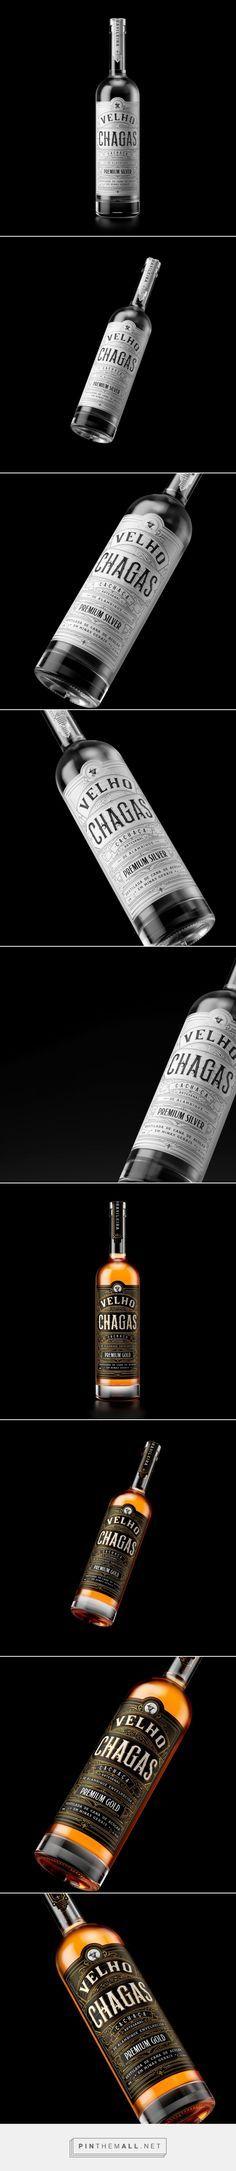 Alcoholic Drink Logo - 1195 Best Alcoholic Drink Packaging Design images in 2019 | Alcohol ...